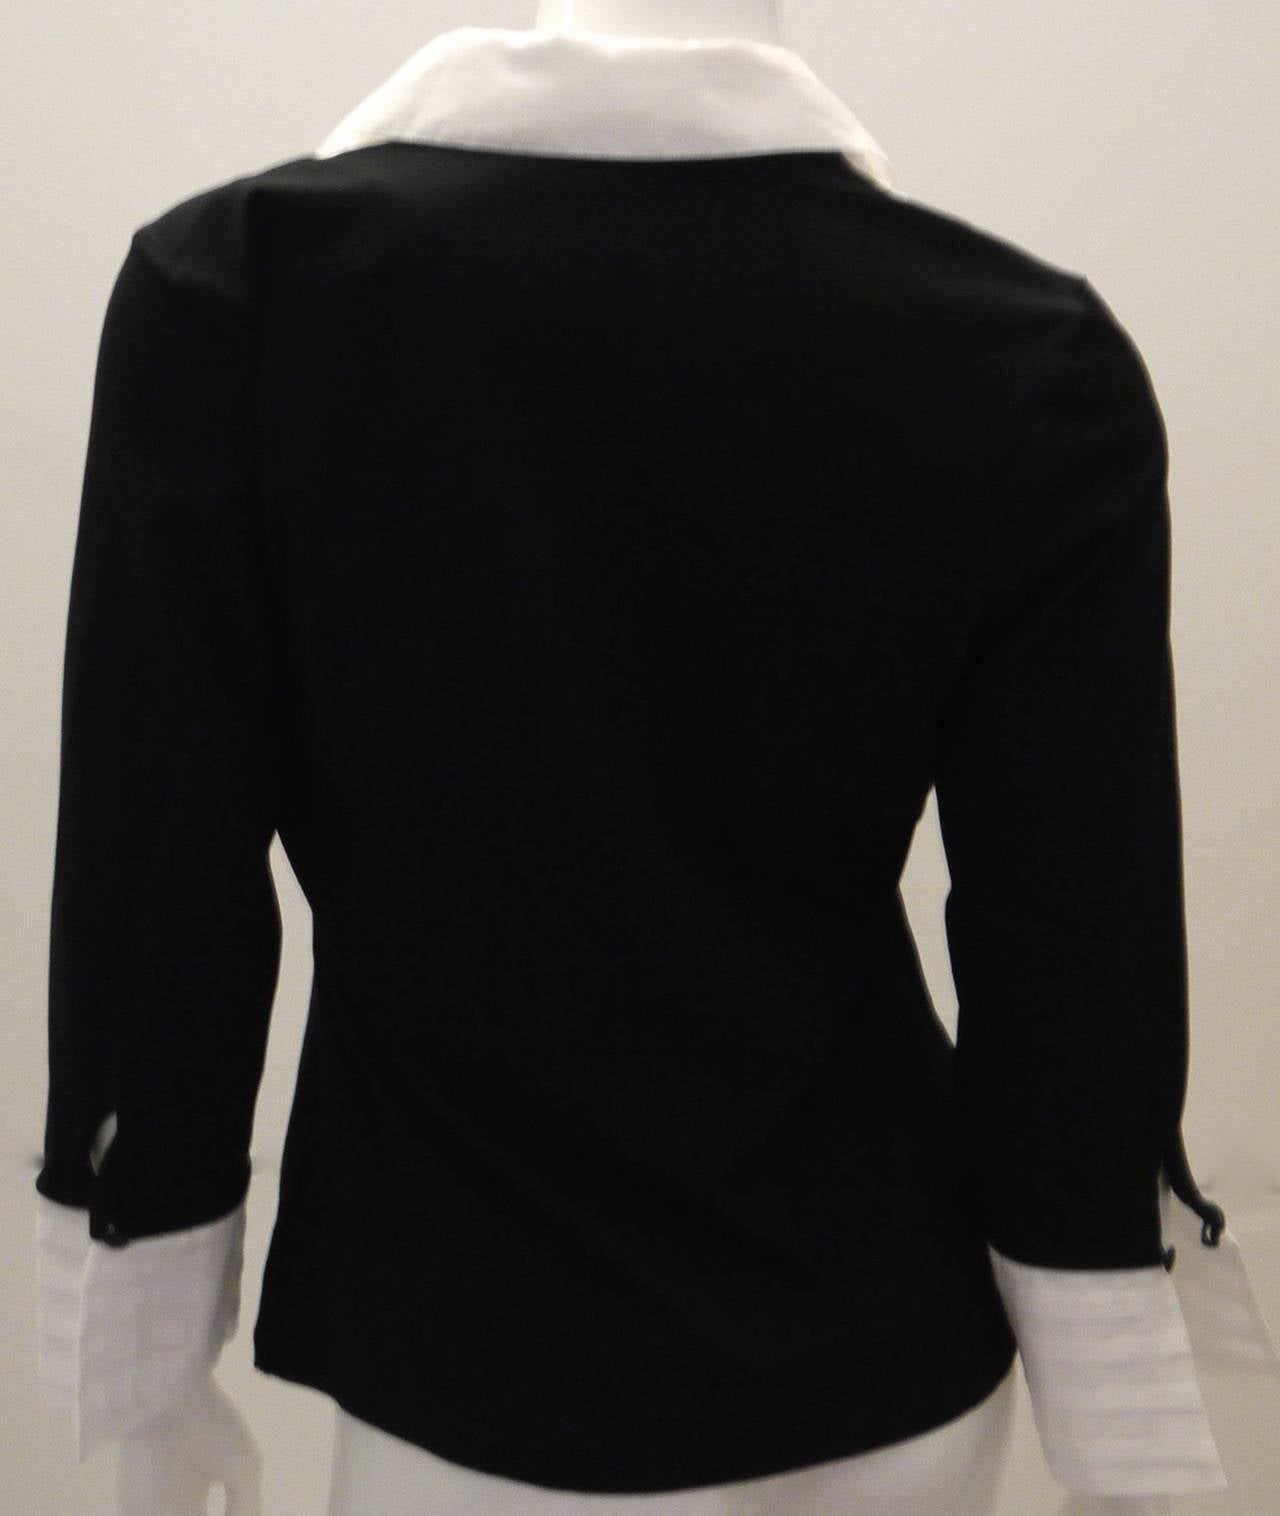 New Anne Fontaine blouse that is made of 93% cotton and 7% elastic in the body of the shirt. The white cuffs and collar are 100% cotton. Size 40. Beautiful top that is great for both formal and informal occasions. Beautifully crafted top.